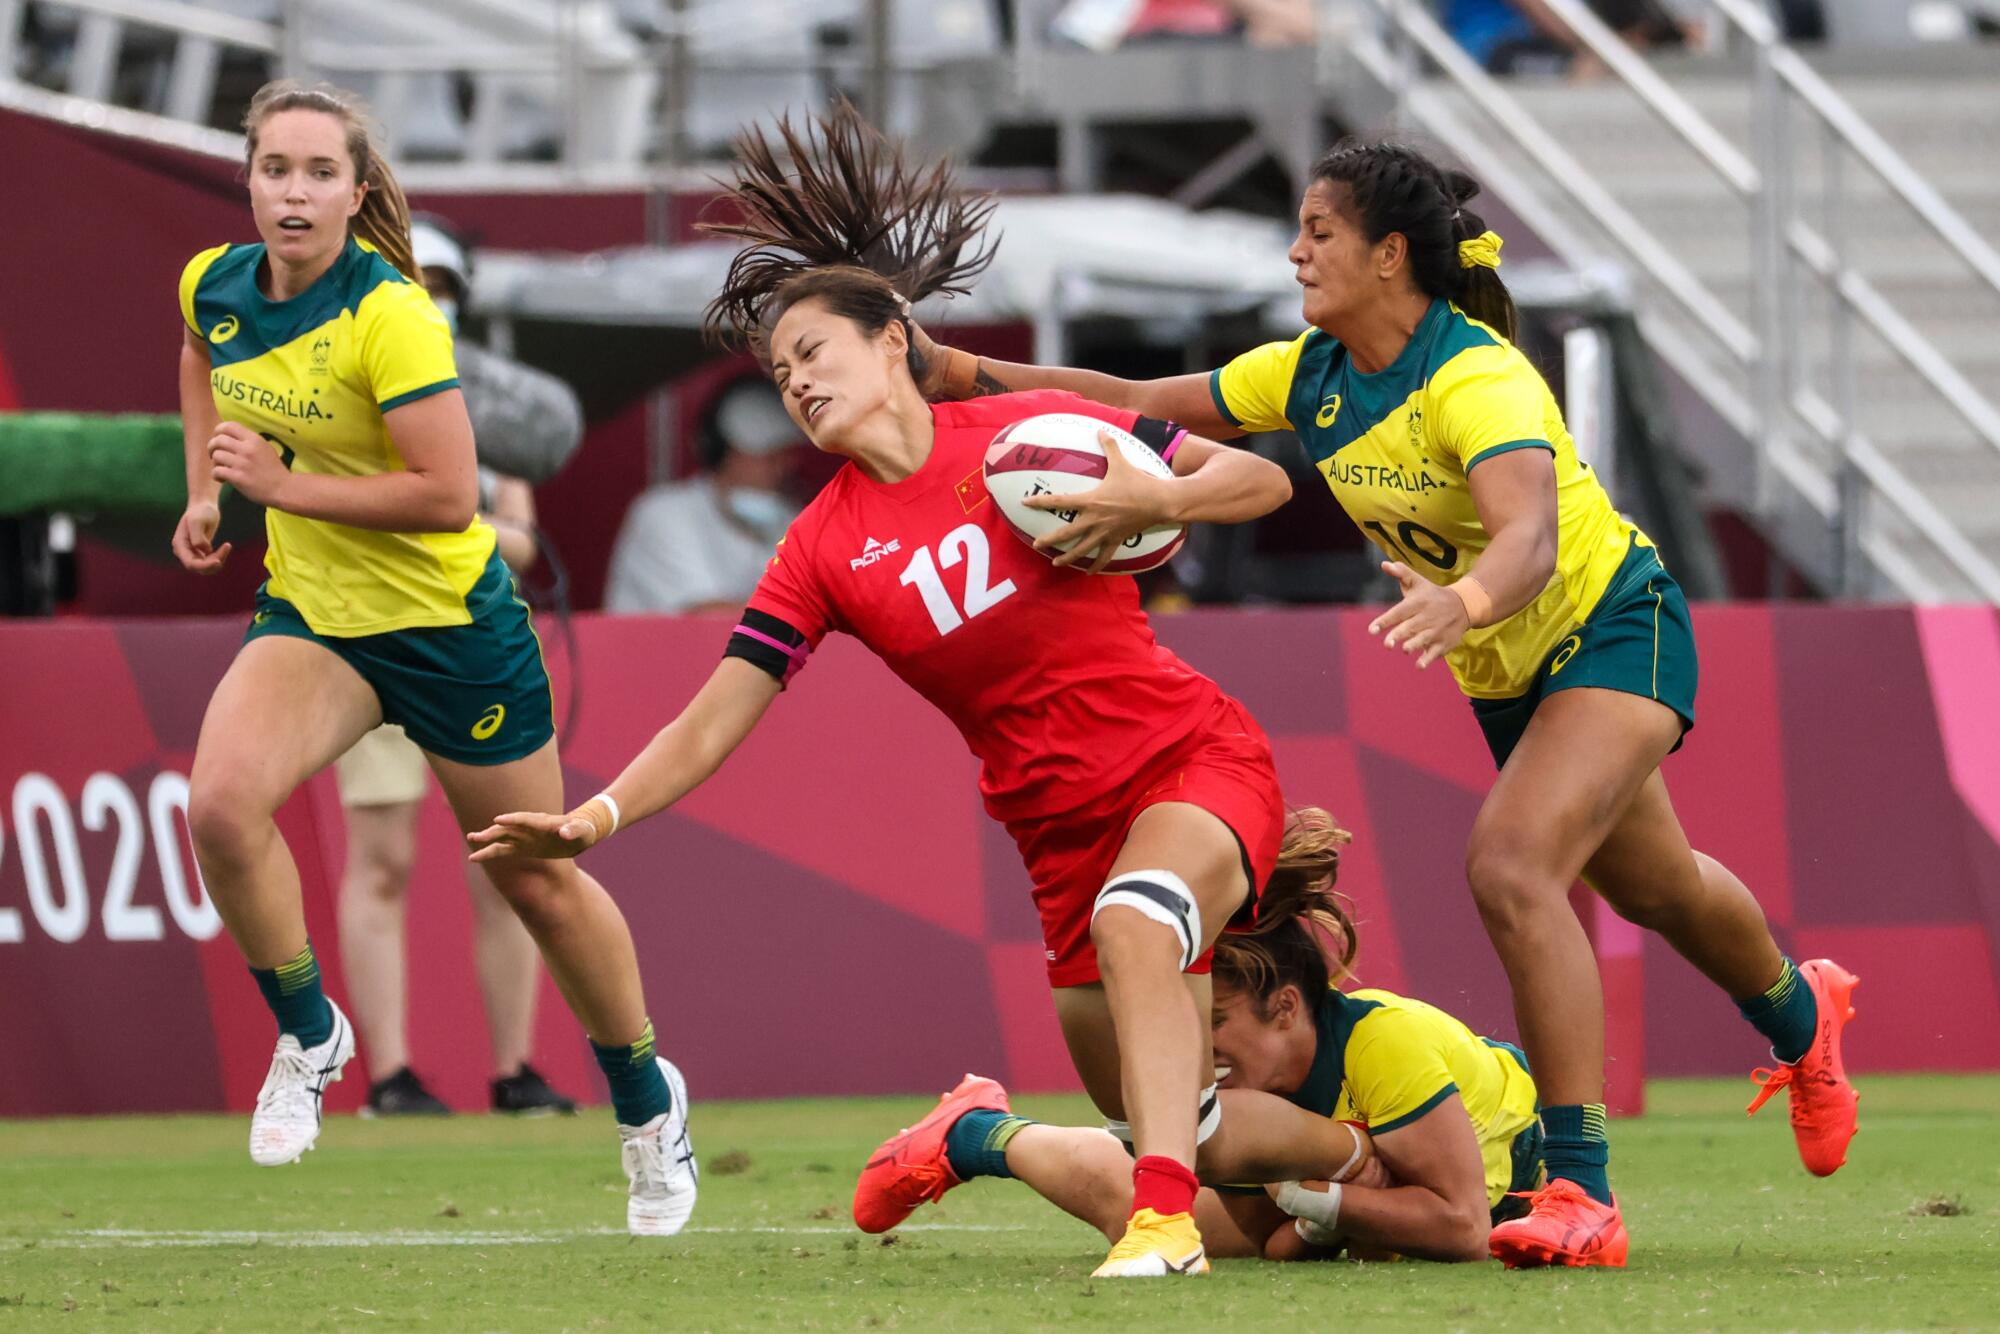 Team China's Hongting Ruan (12) struggles to outrun Team Australia's  Sariah Paki (10) in the Women's Rugby Sevens.